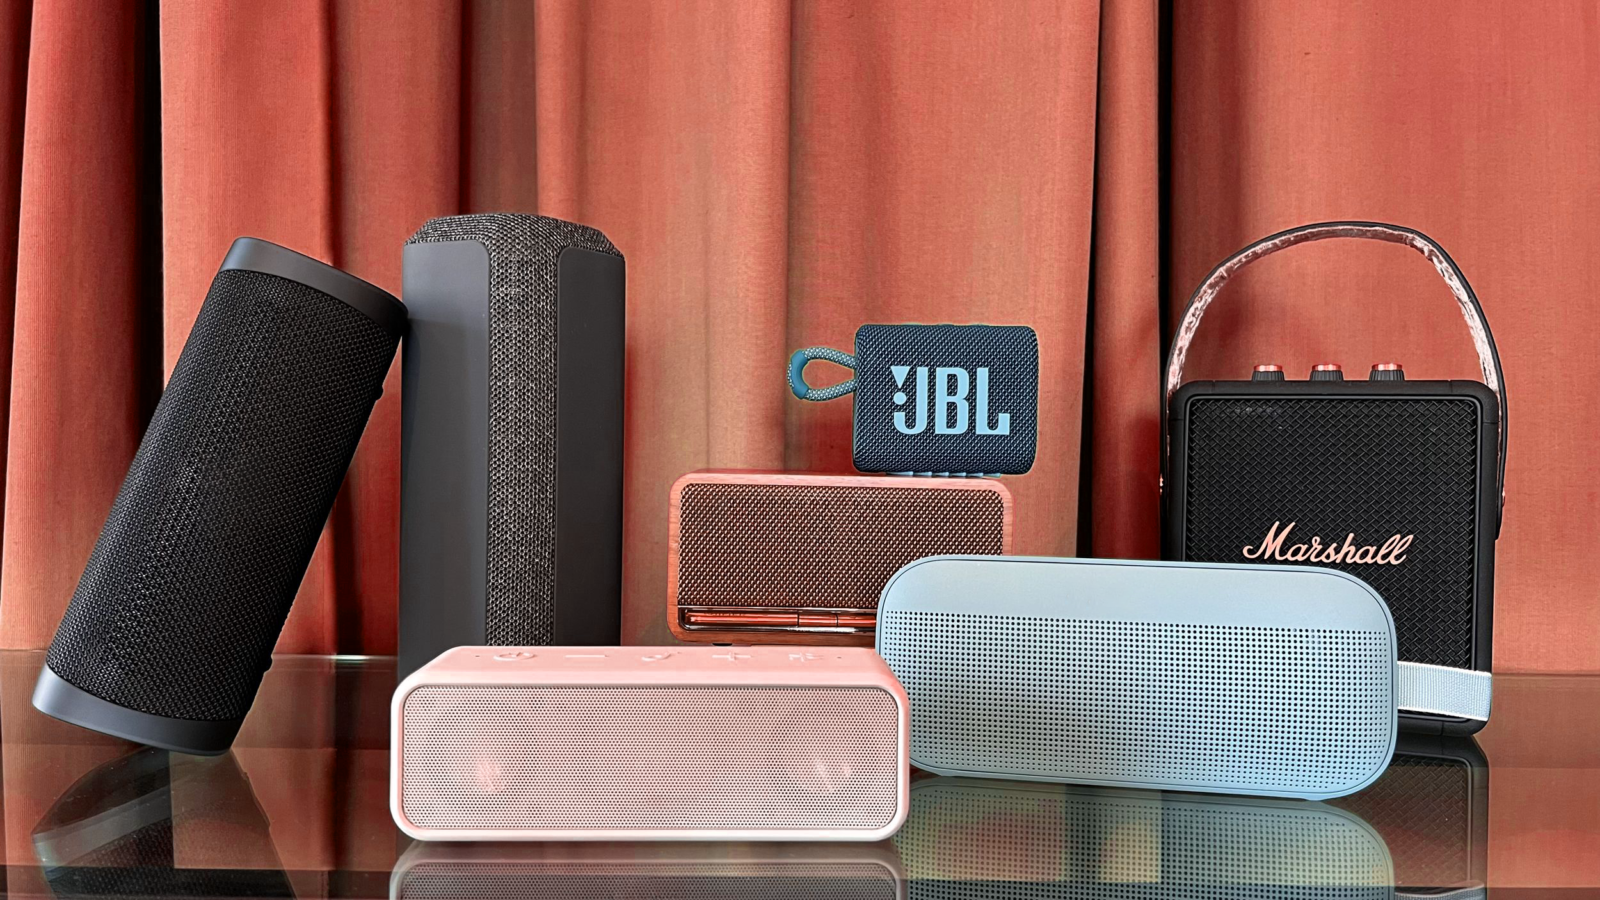 From JBL to Marshall, this lineup presents the best Bluetooth speakers for camping, ensuring high-quality sound for any outdoor enthusiast.